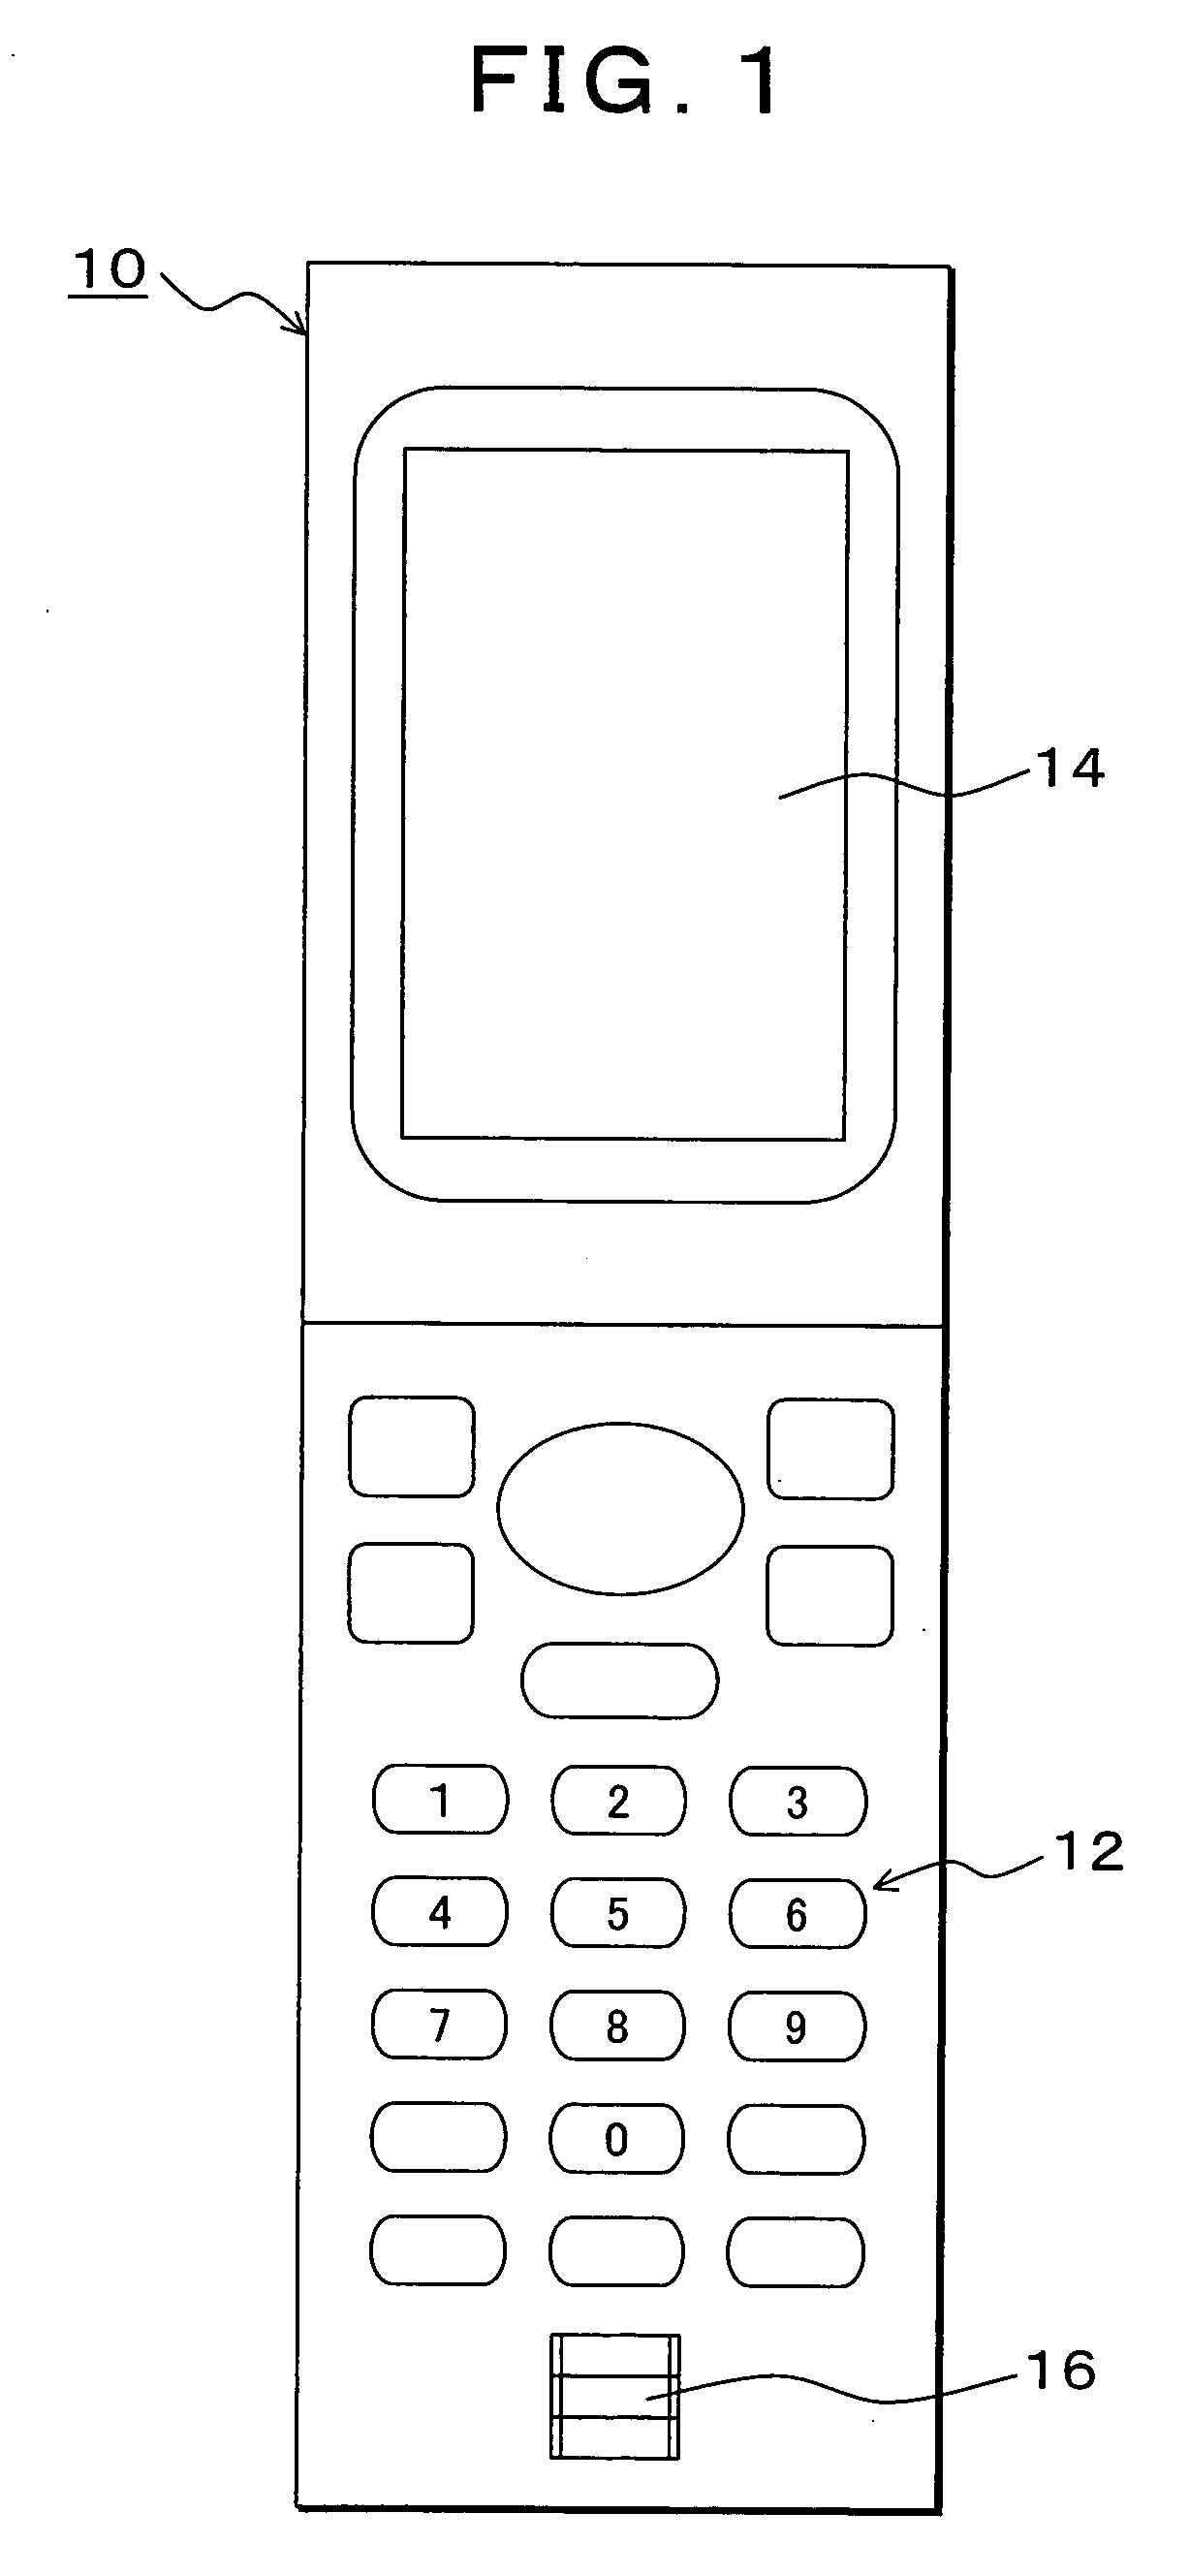 Security management method, program, and information device